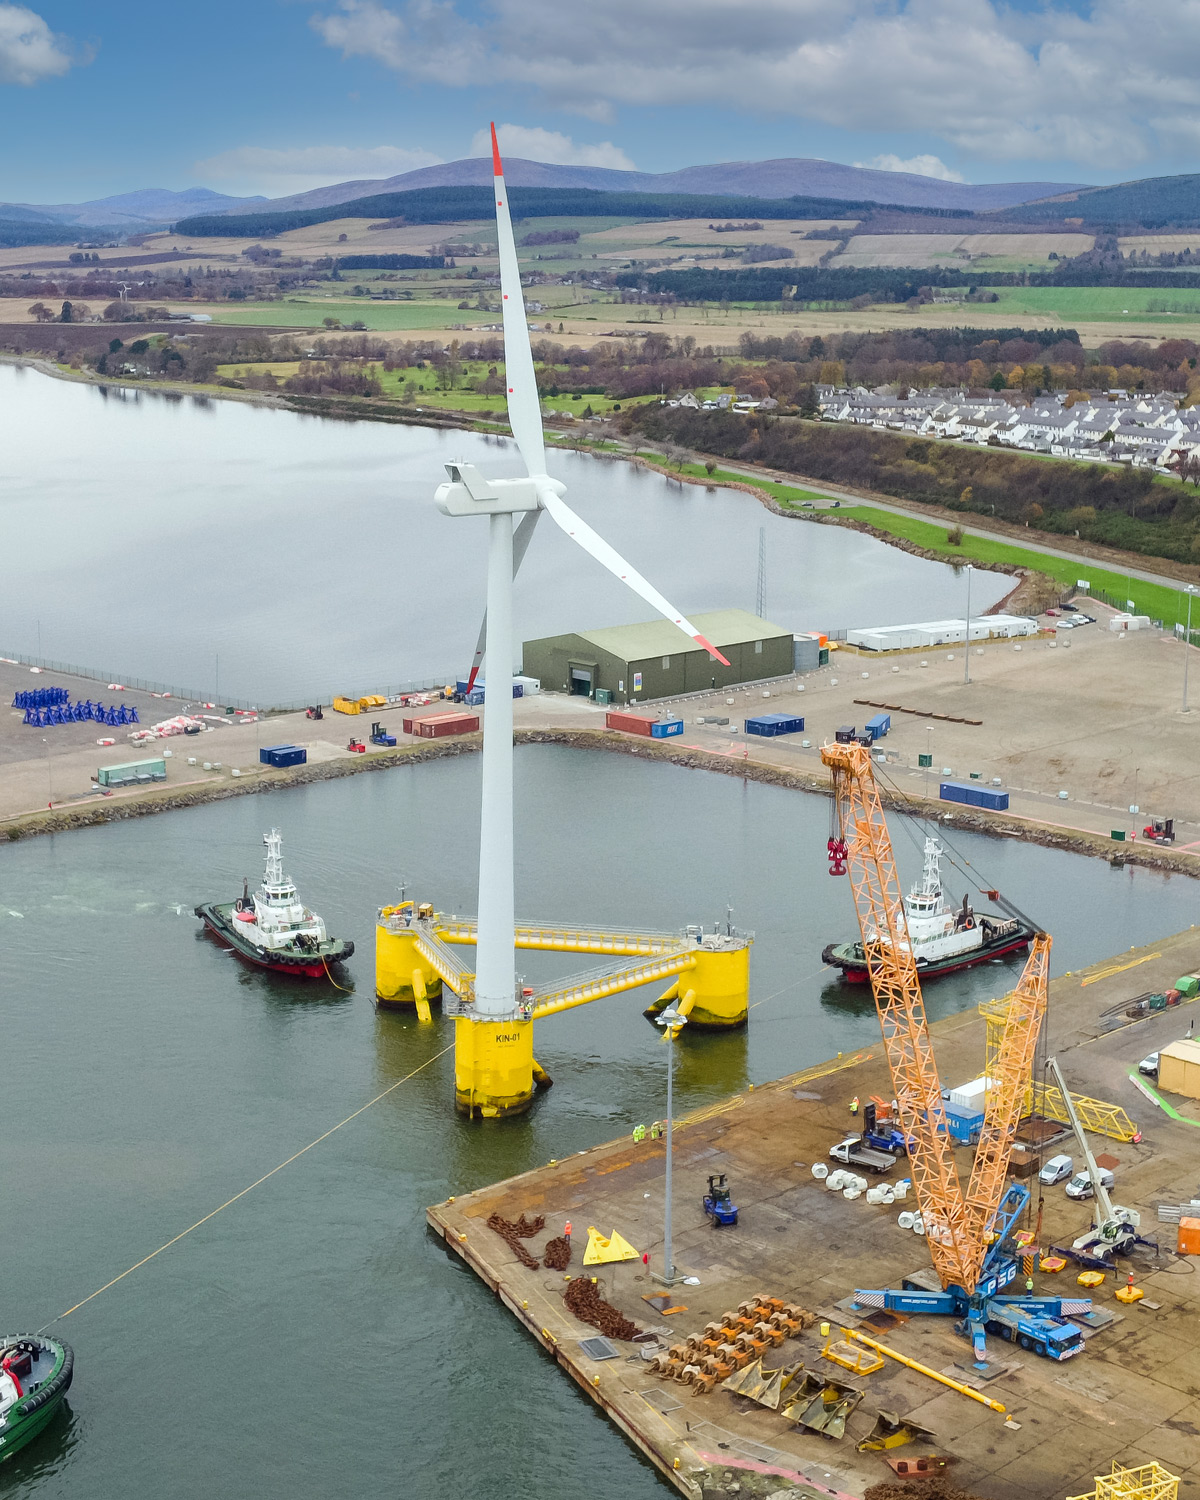 The Port of Cromarty Firth used as the construction port for part of the Kincardine project. Image courtesy of Port of Cromarty Firth. All rights reserved.